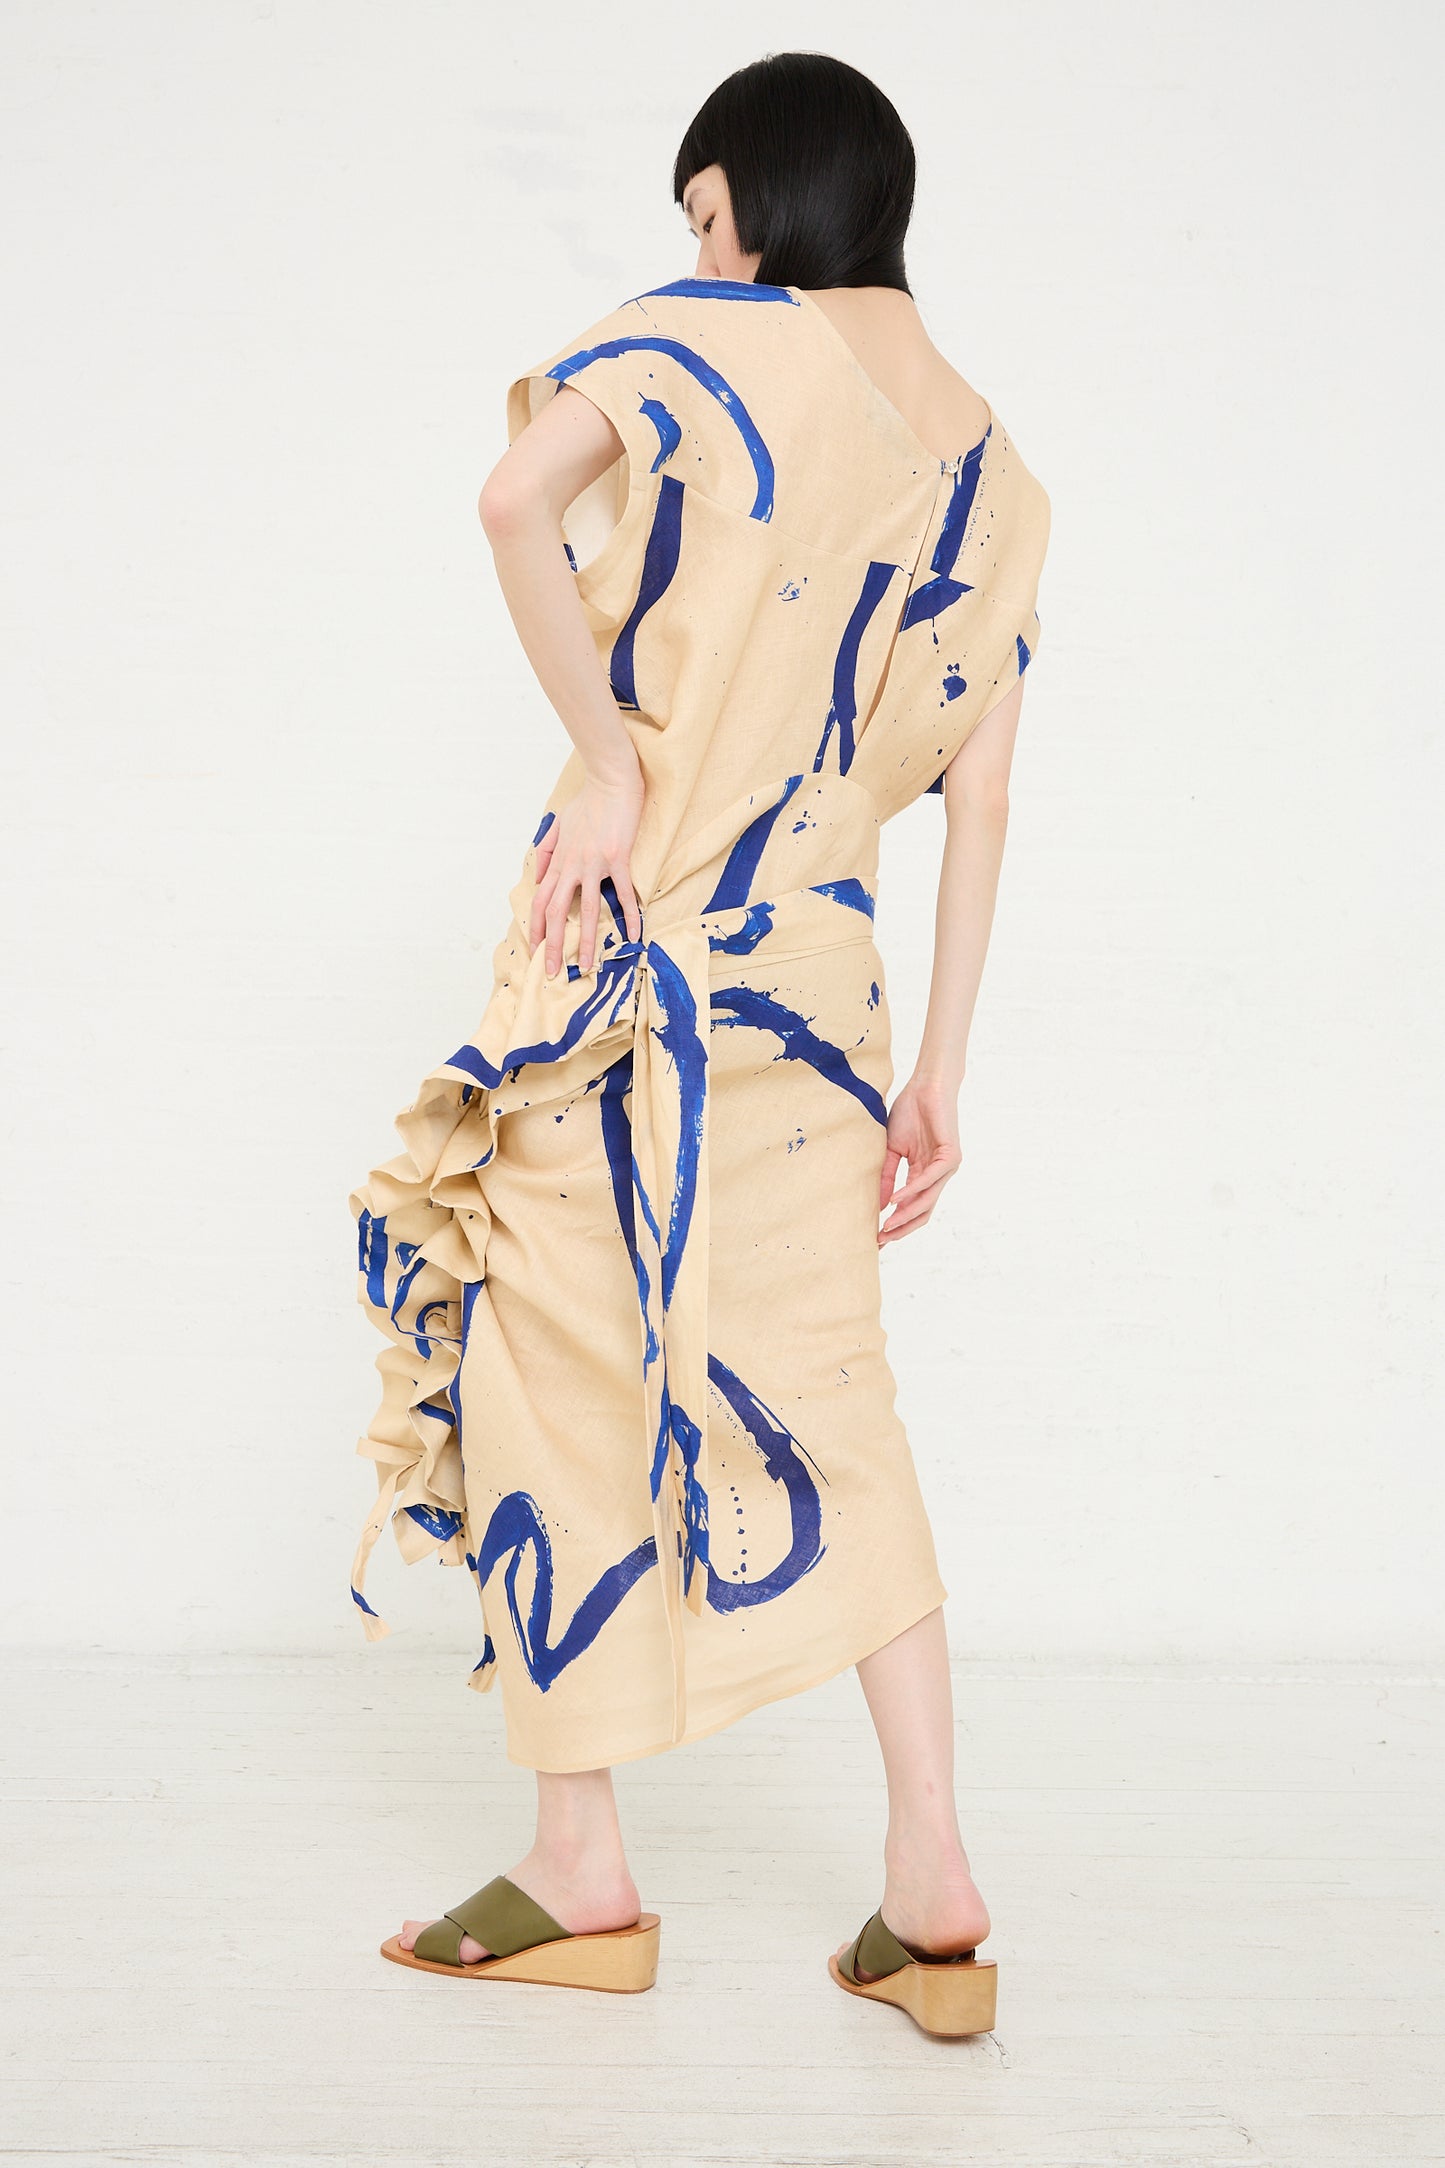 A woman models a Rachel Comey Regent Dress in Blush, with abstract printed linen patterns, viewed from behind.